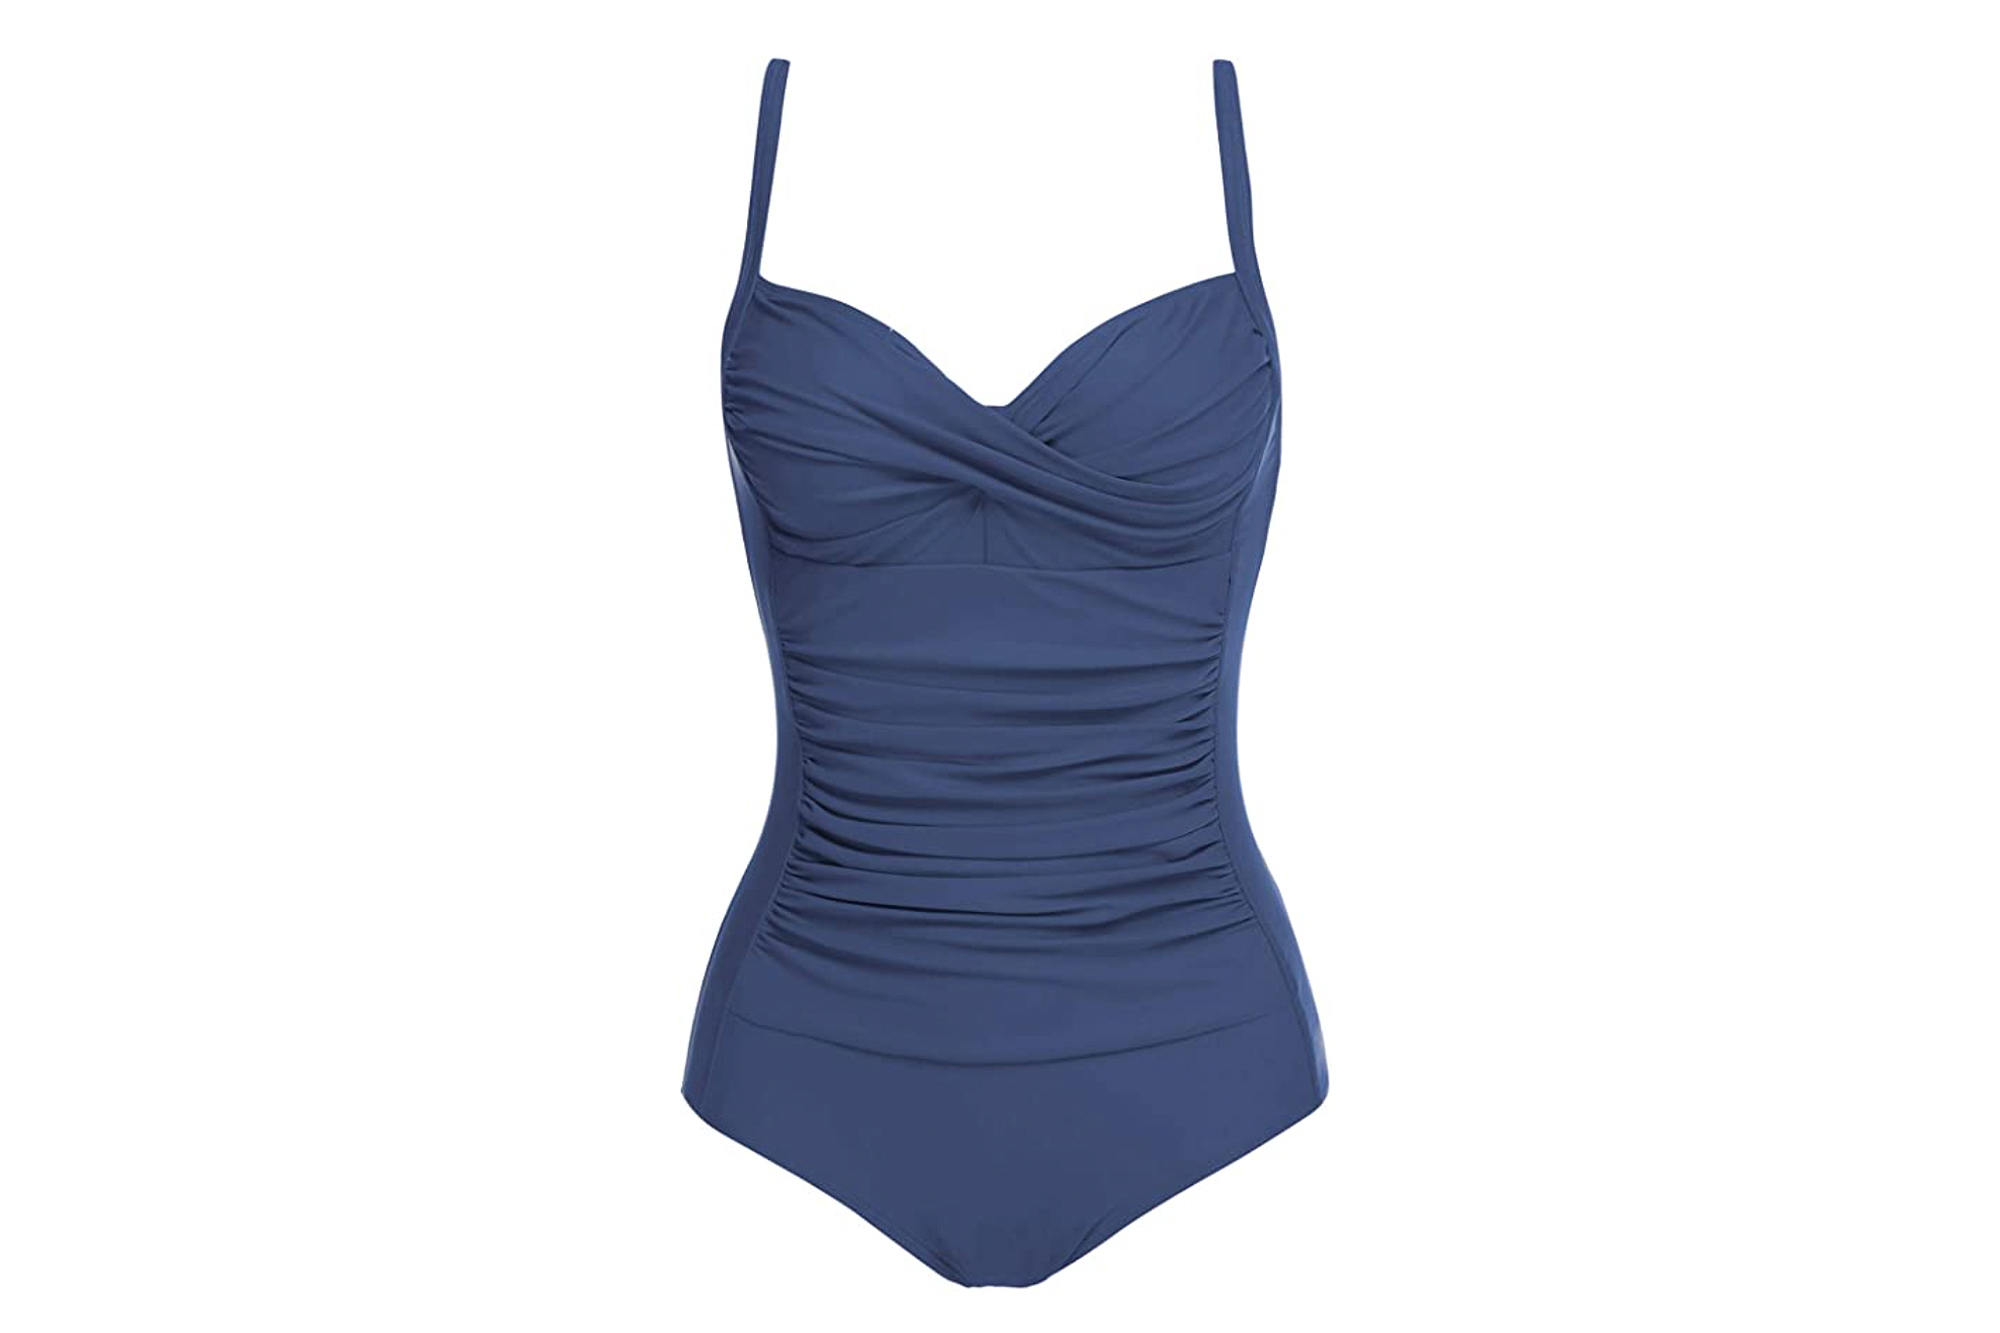 Ekouaer One-Piece Swimsuit Has the Most Expertly Placed Ruching